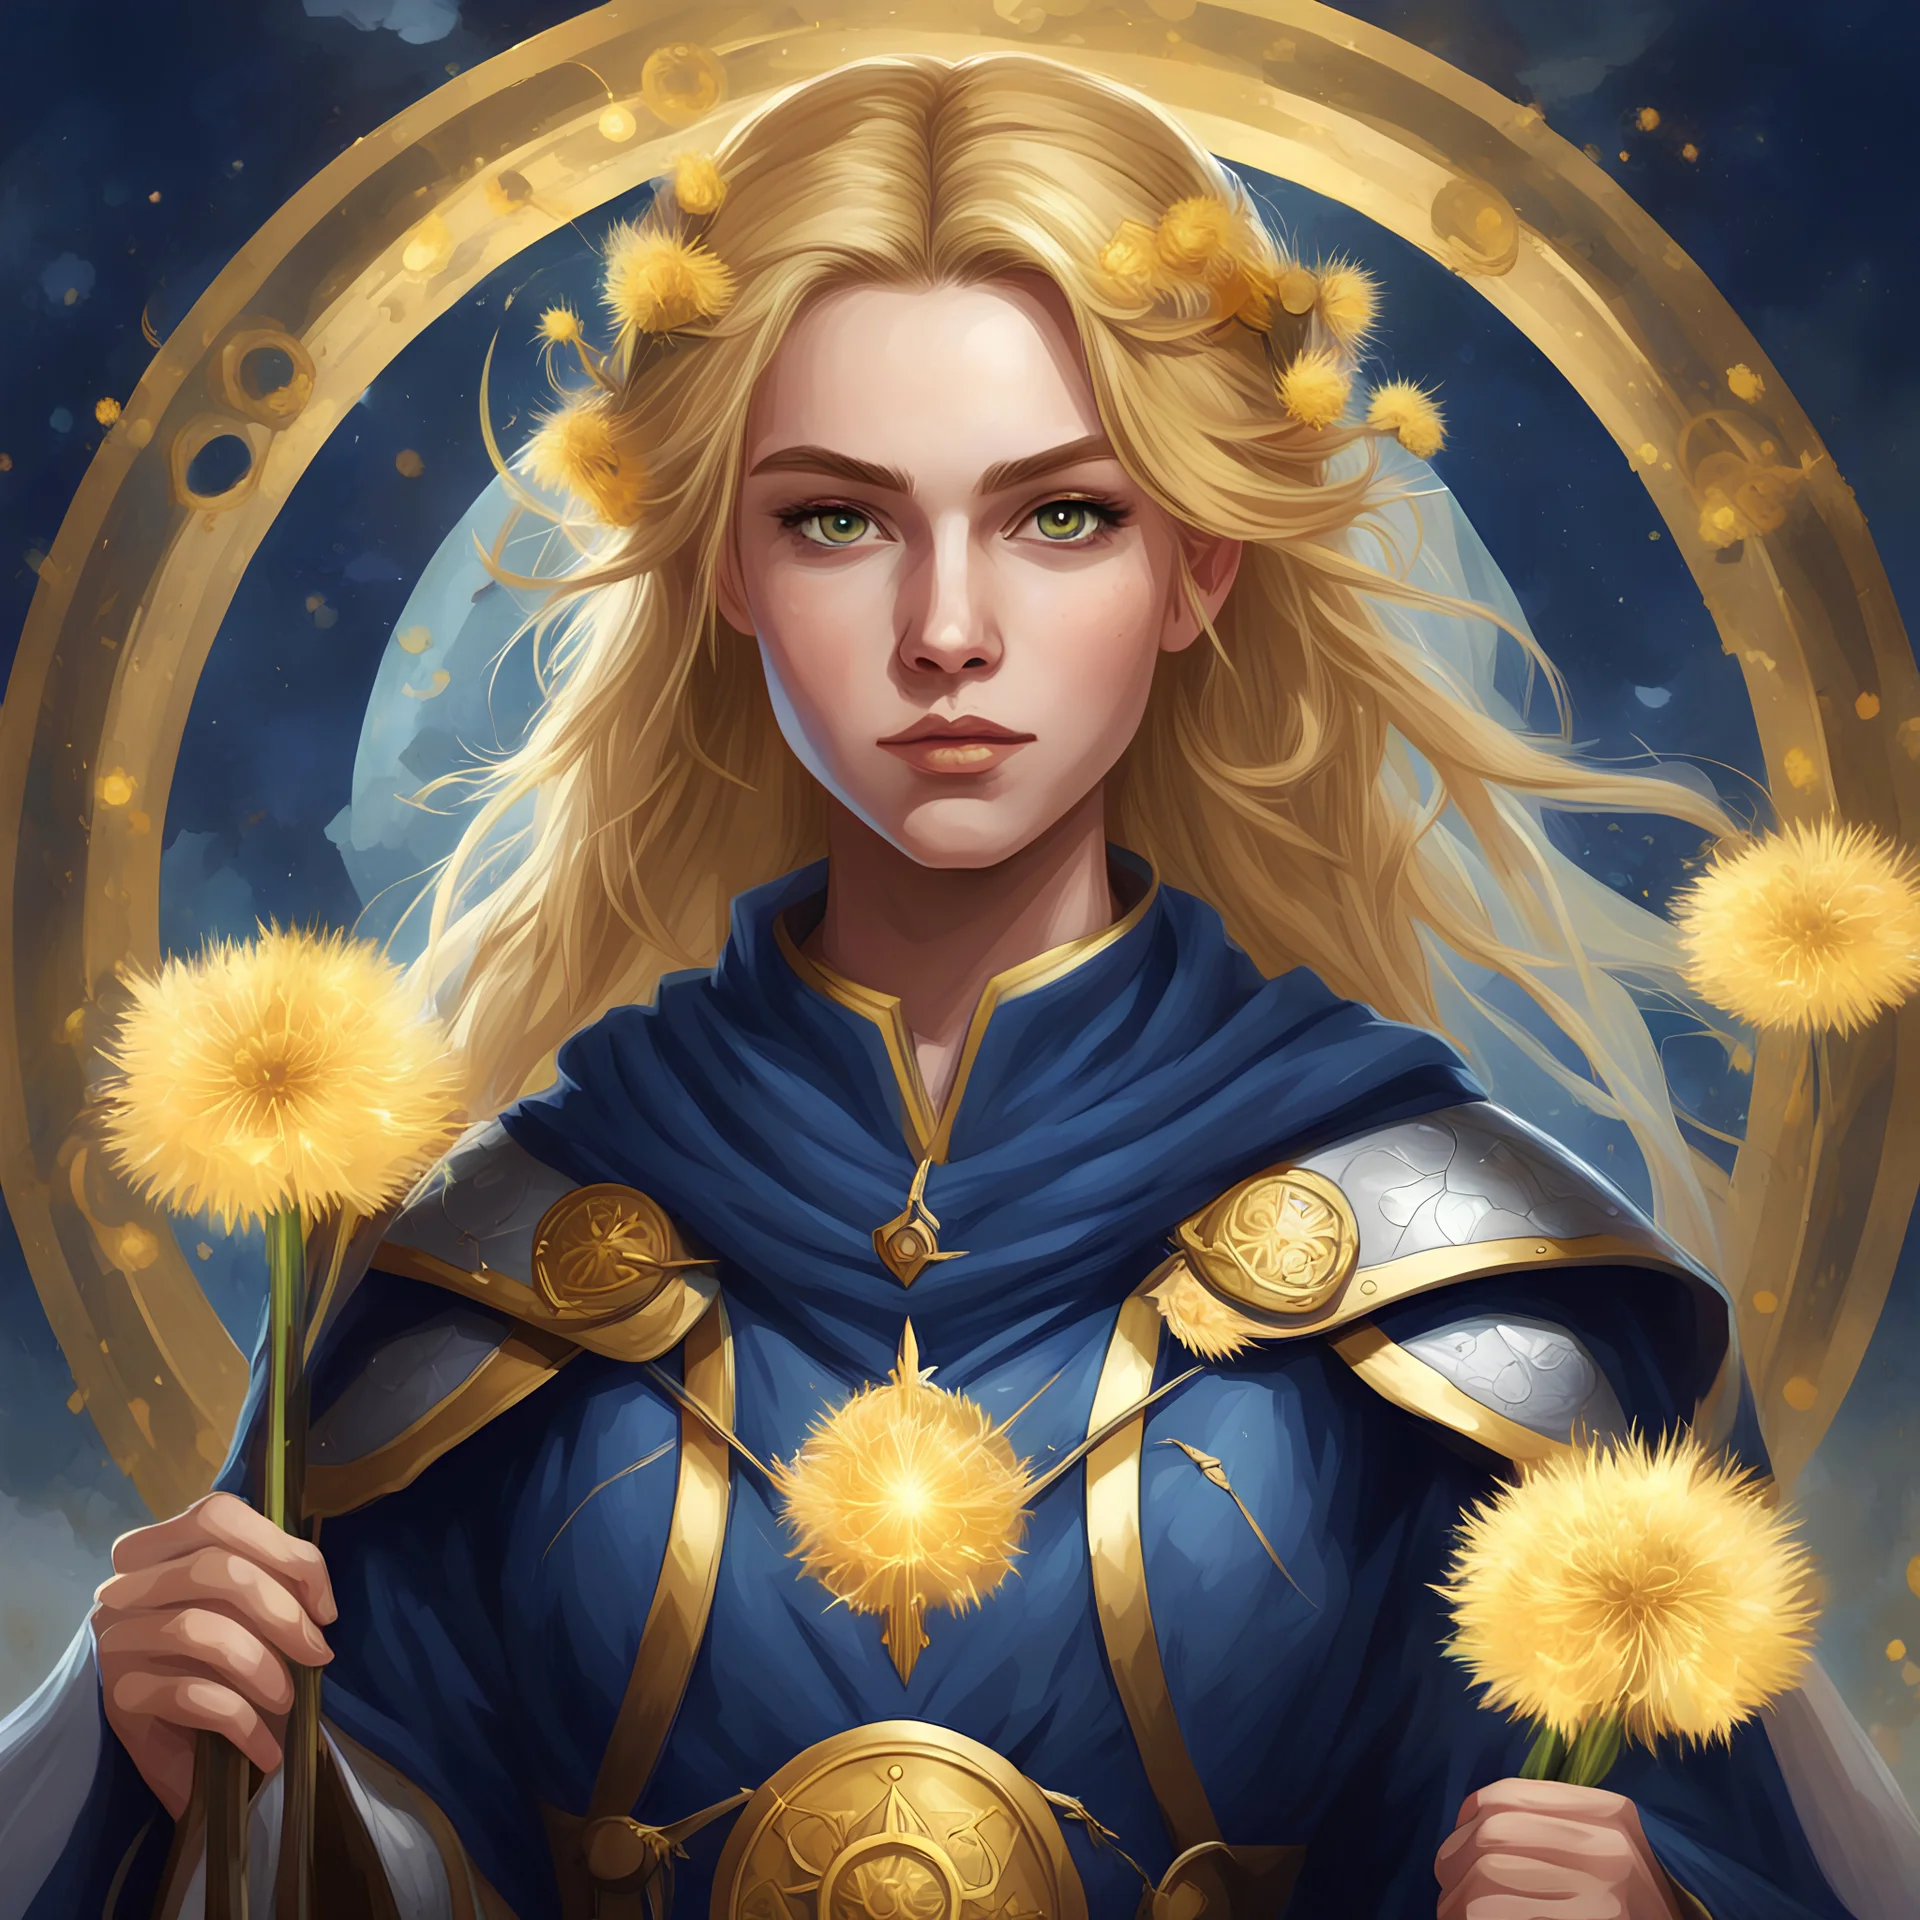 dungeons & dragons; digital art; portrait; female; cleric; gold eyes; golden hair; young woman; robes; long veil; soft clothes; dark blue and gold robes; robes with armor; cleric of bahamut; dandelions; teenager; traveling; circle halo background